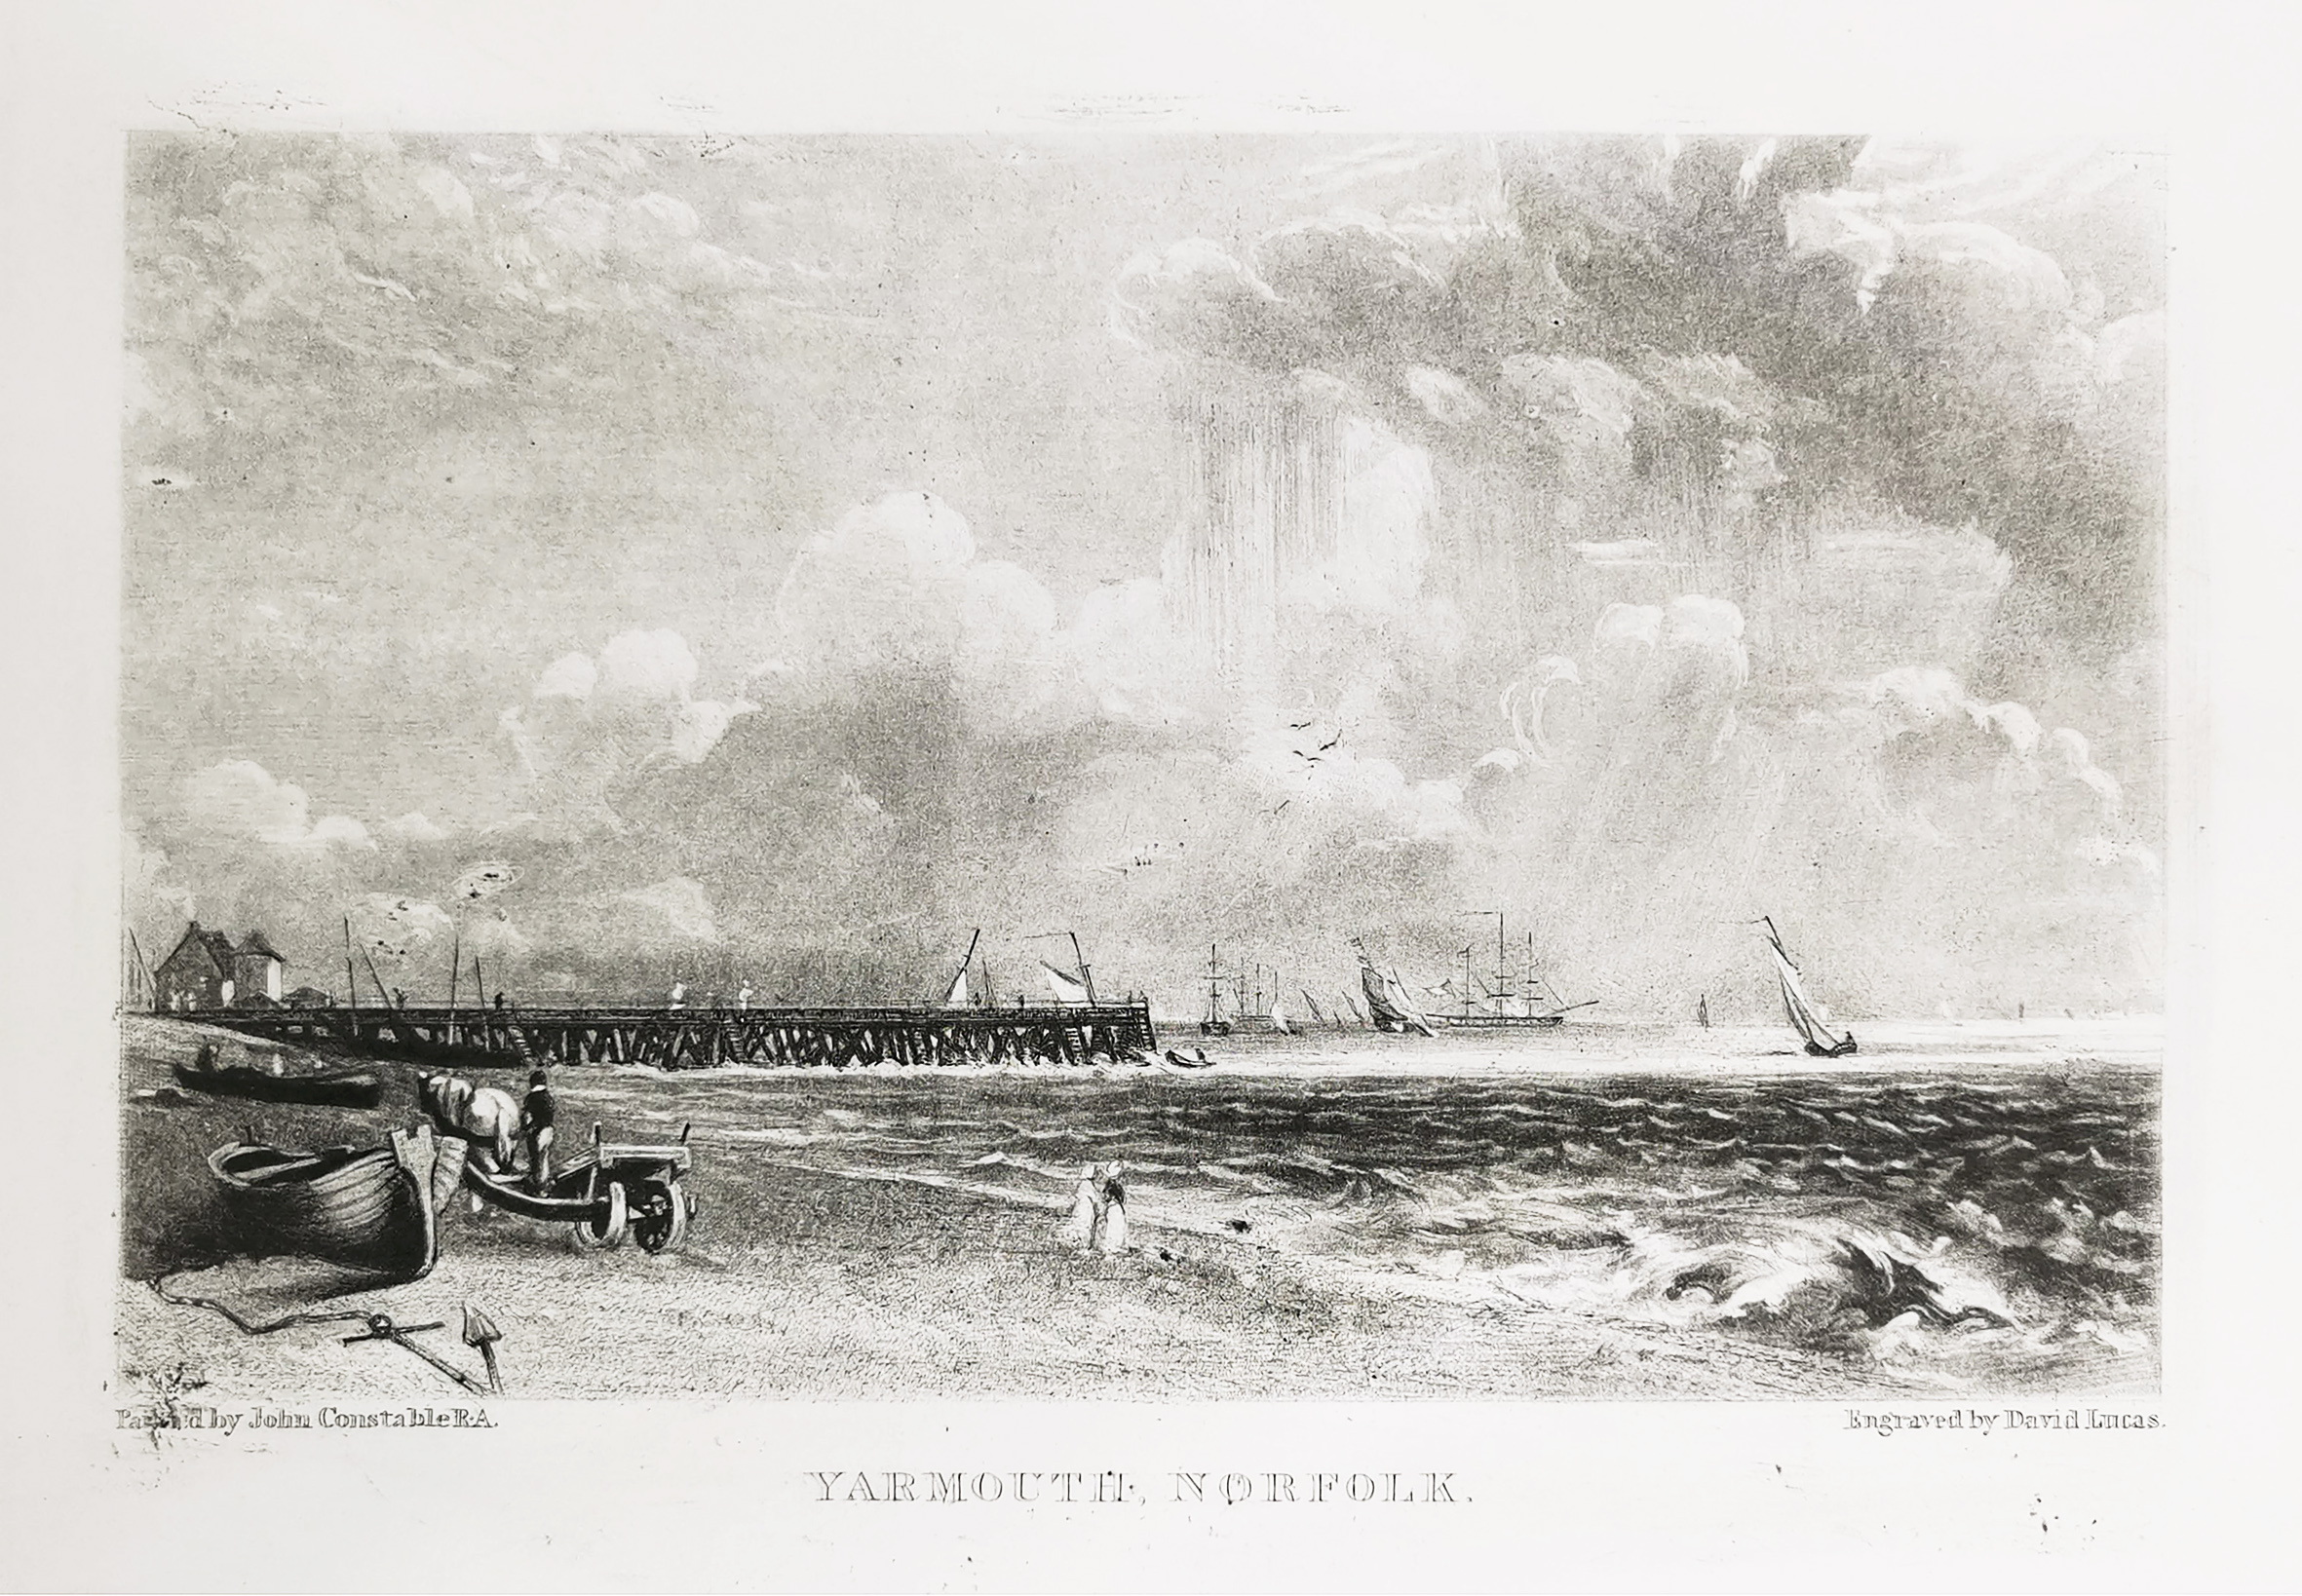 Yarmouth Norfolk - Antique Print from 1855